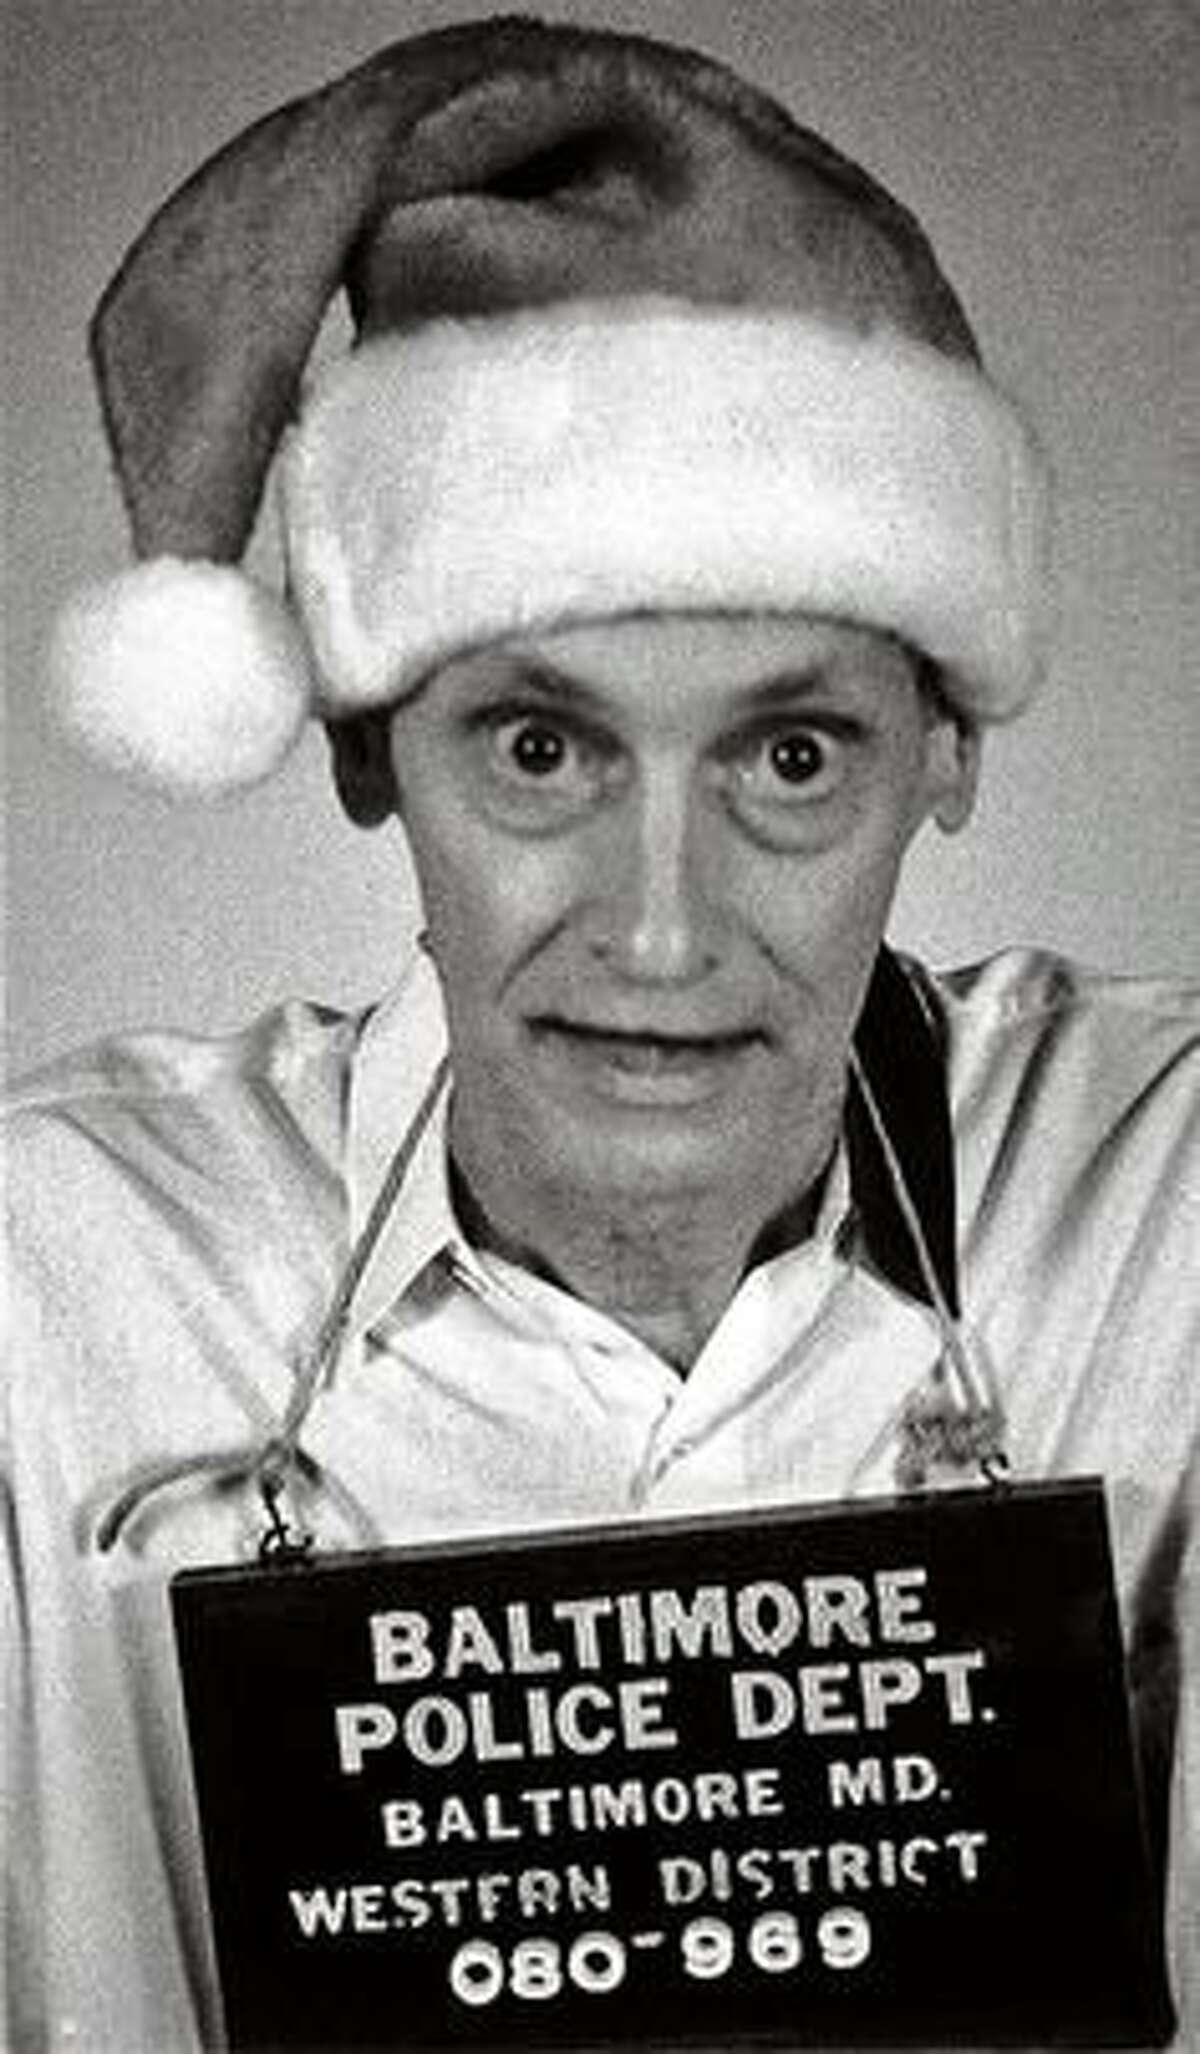 A fake mugshot by the Baltimore Police John Waters used one year as the image for his Christmas card.